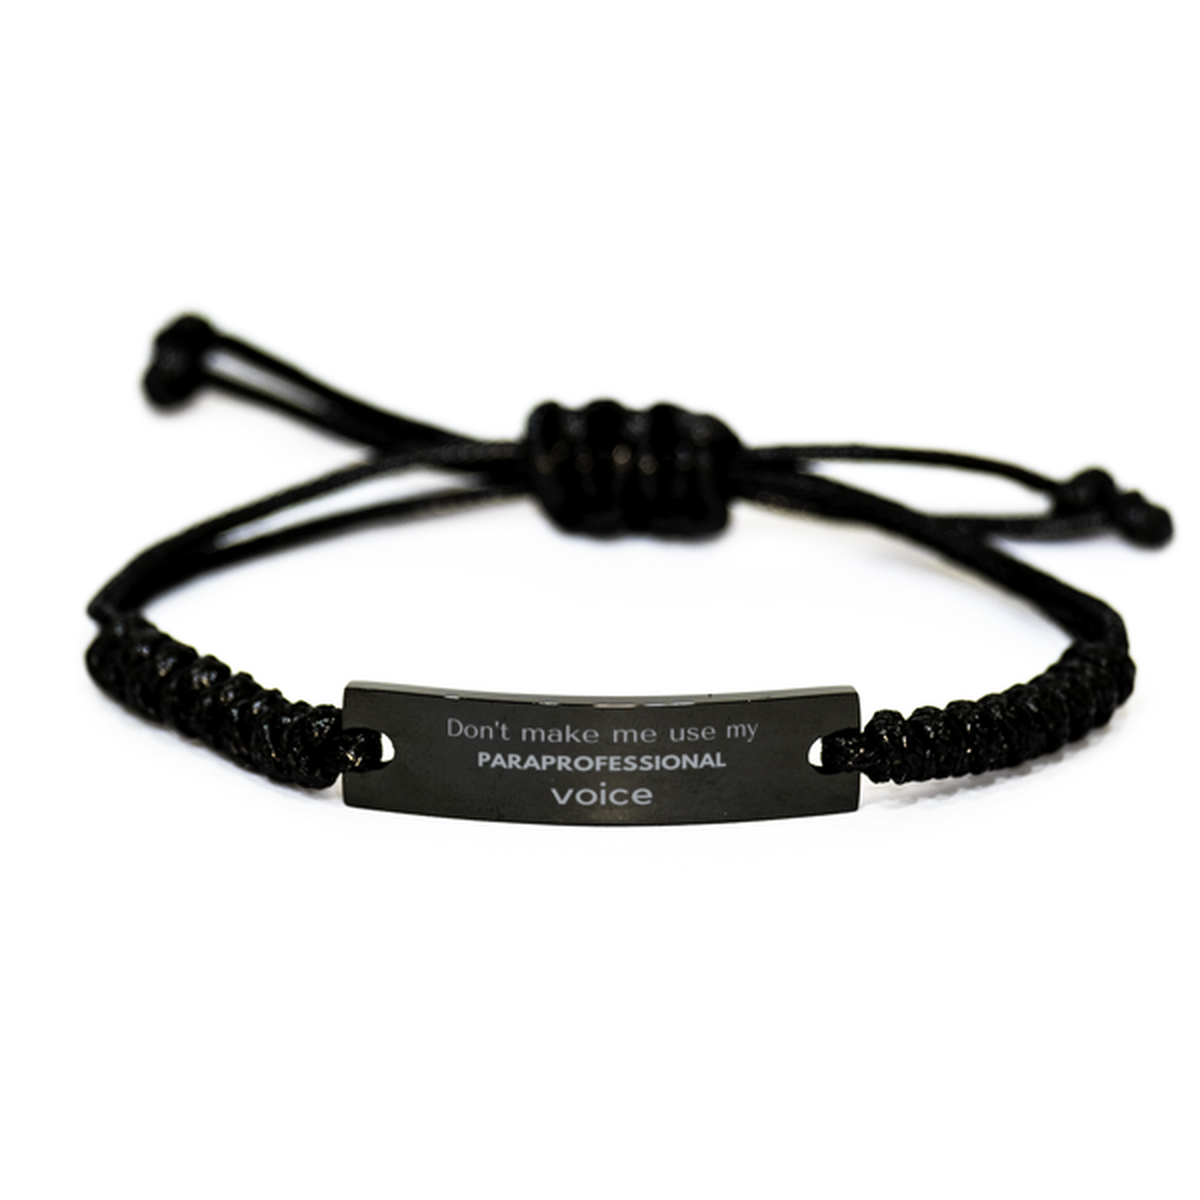 Don't make me use my Paraprofessional voice, Sarcasm Paraprofessional Gifts, Christmas Paraprofessional Black Rope Bracelet Birthday Unique Gifts For Paraprofessional Coworkers, Men, Women, Colleague, Friends